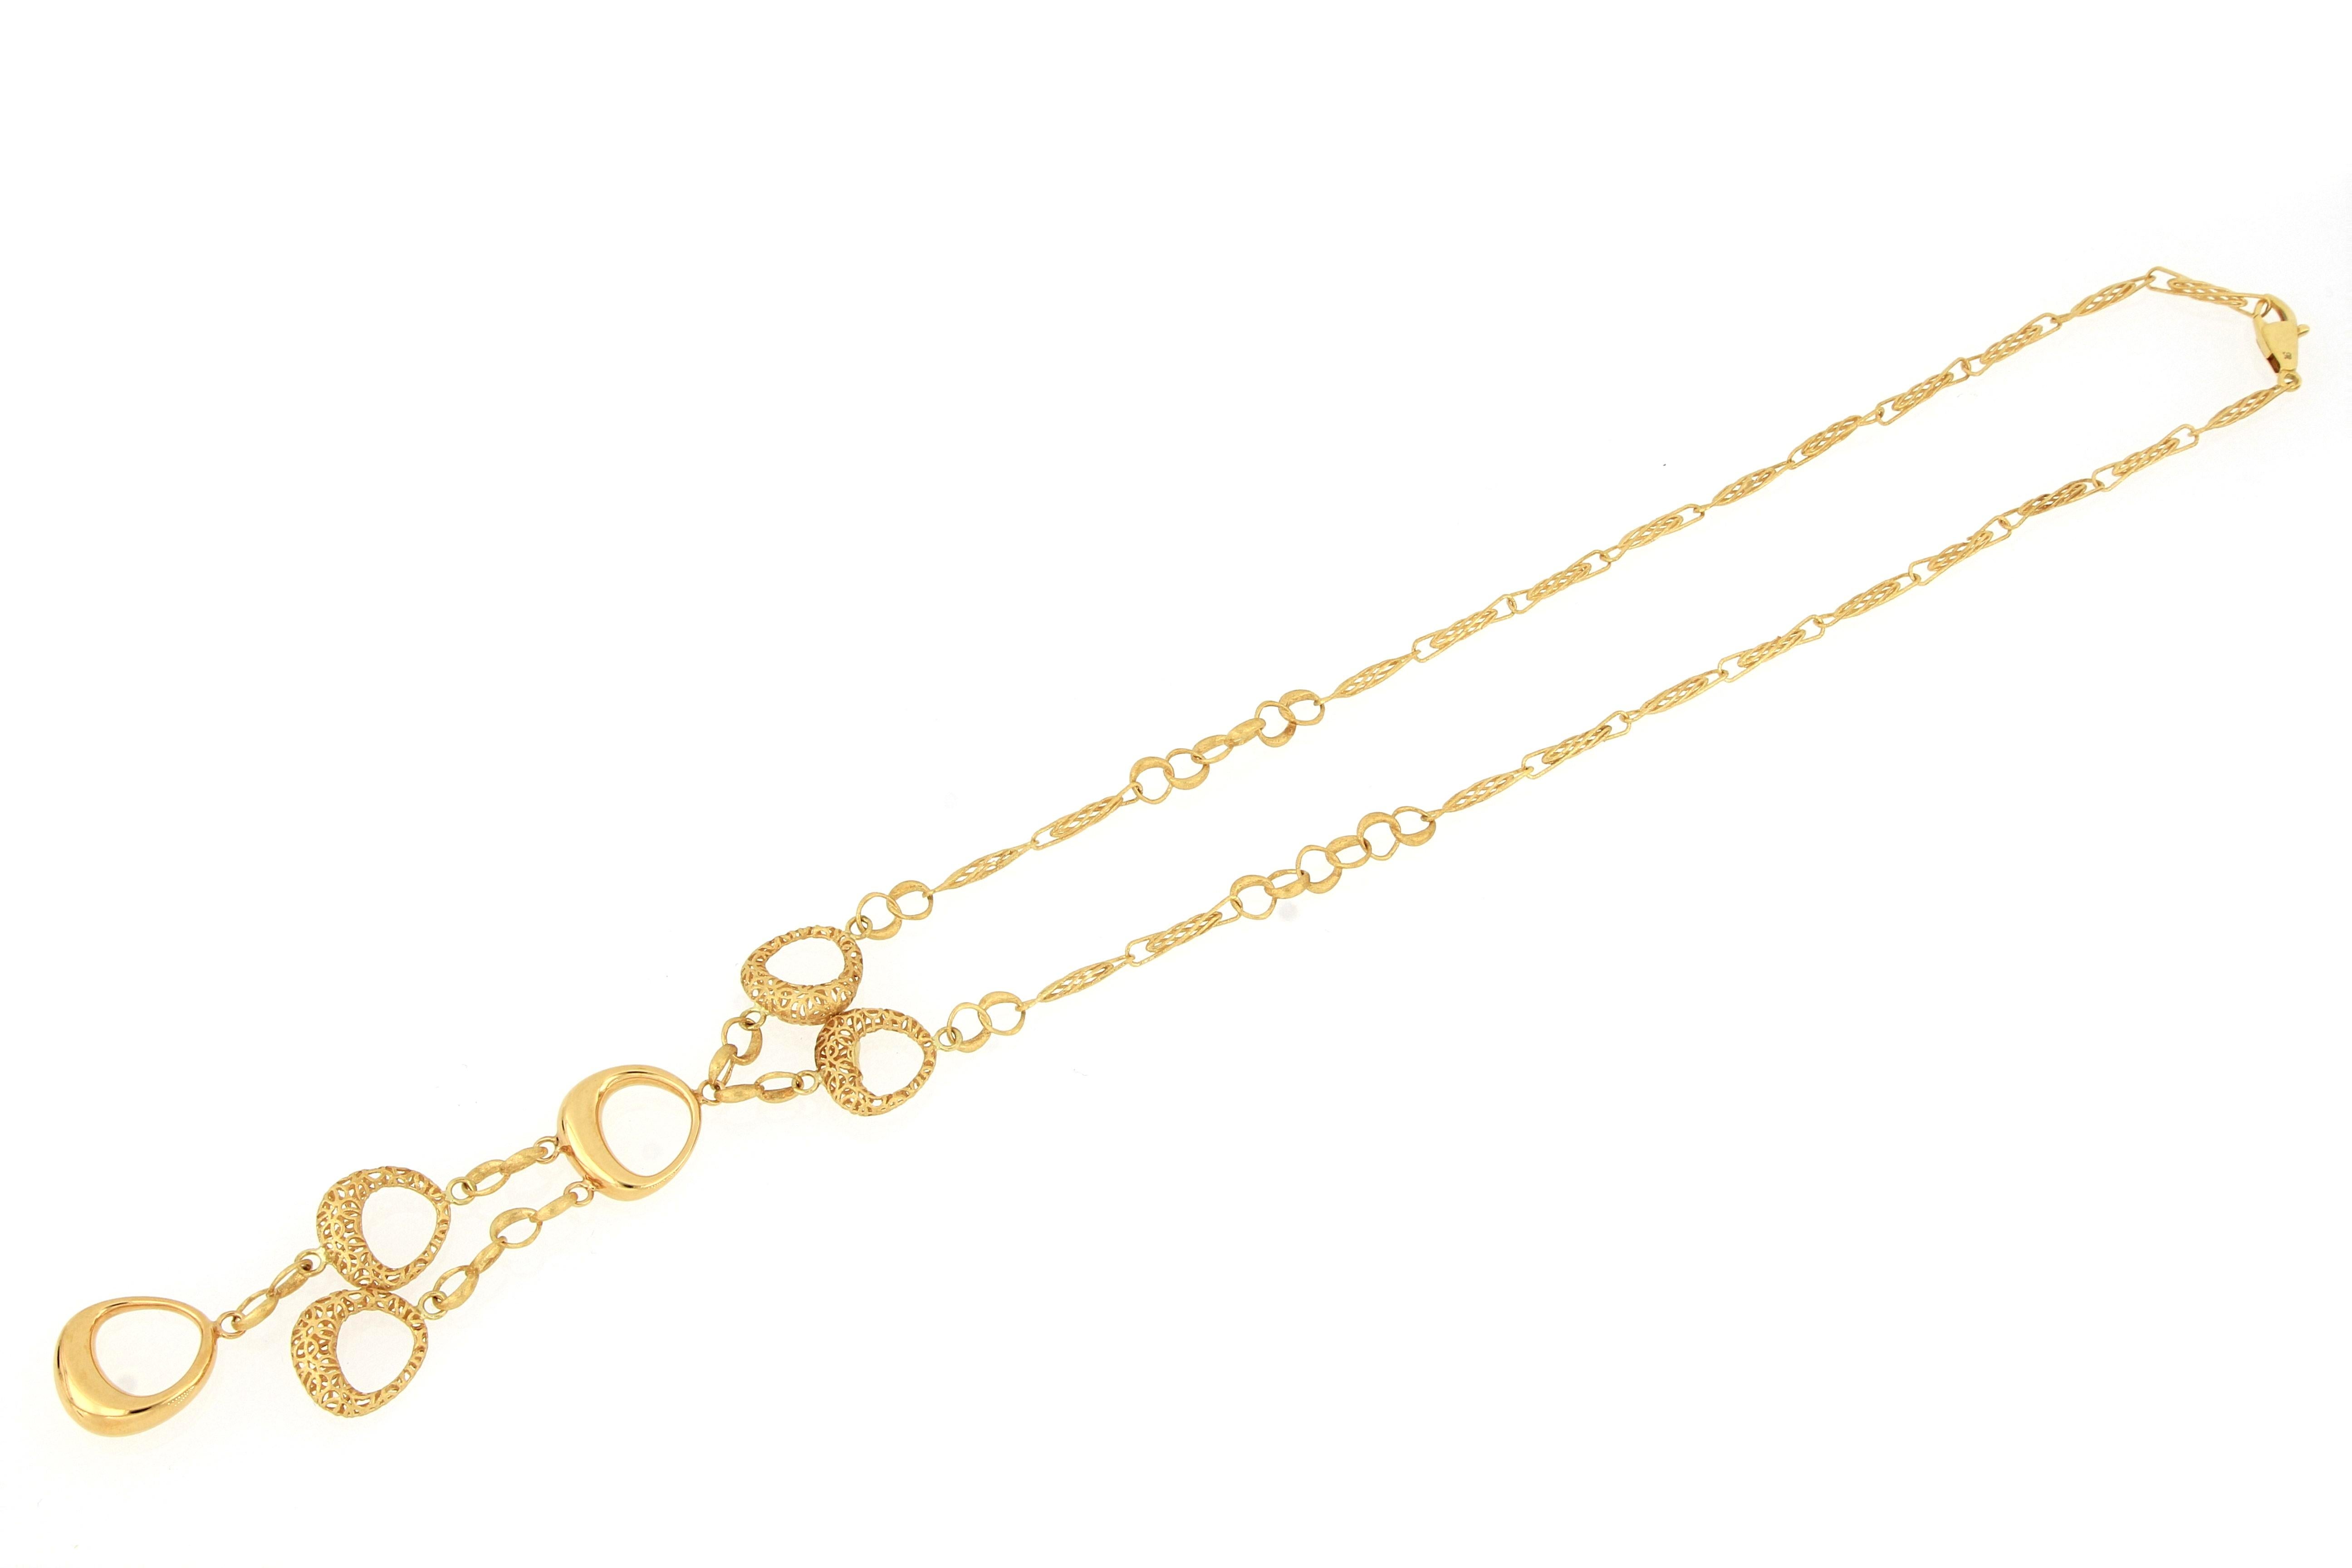 This fabulous 18 karat gold necklace, designed and made in Italy, with exquisite craftsmanship. Parts of the jewellery piece is hollowed out by electroforming and other parts are carved out and all connected by interlocking chain. The piece is